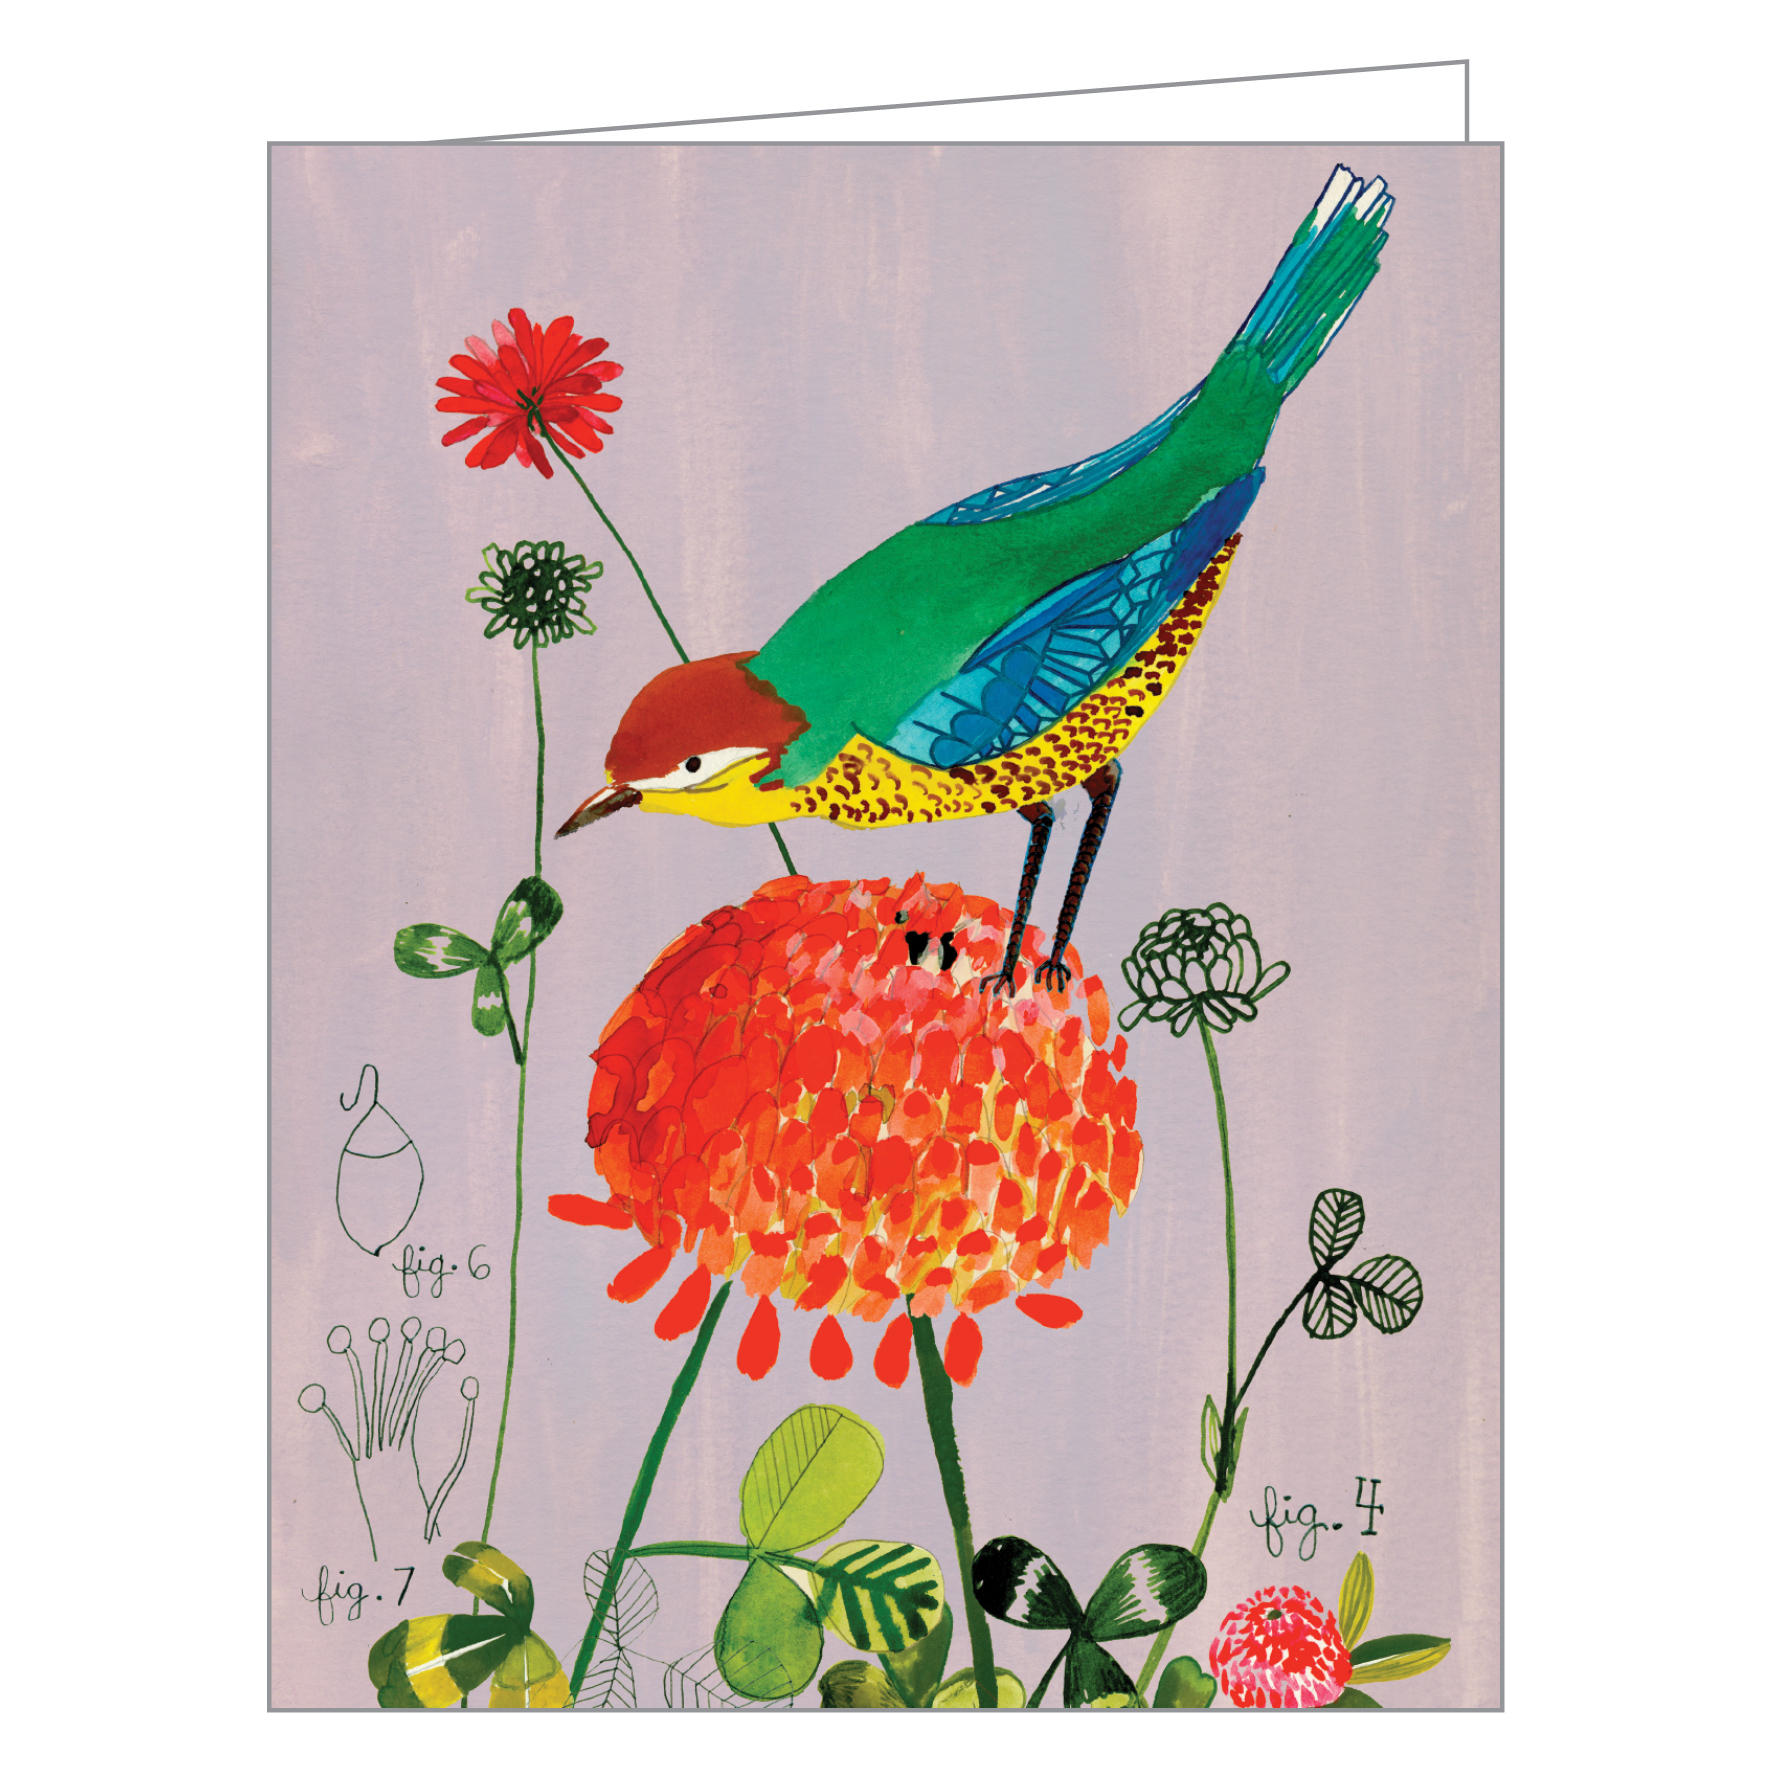 Anisa Makhoul's watercolour illustration of small bird, on notecard box, by teNeues stationers.